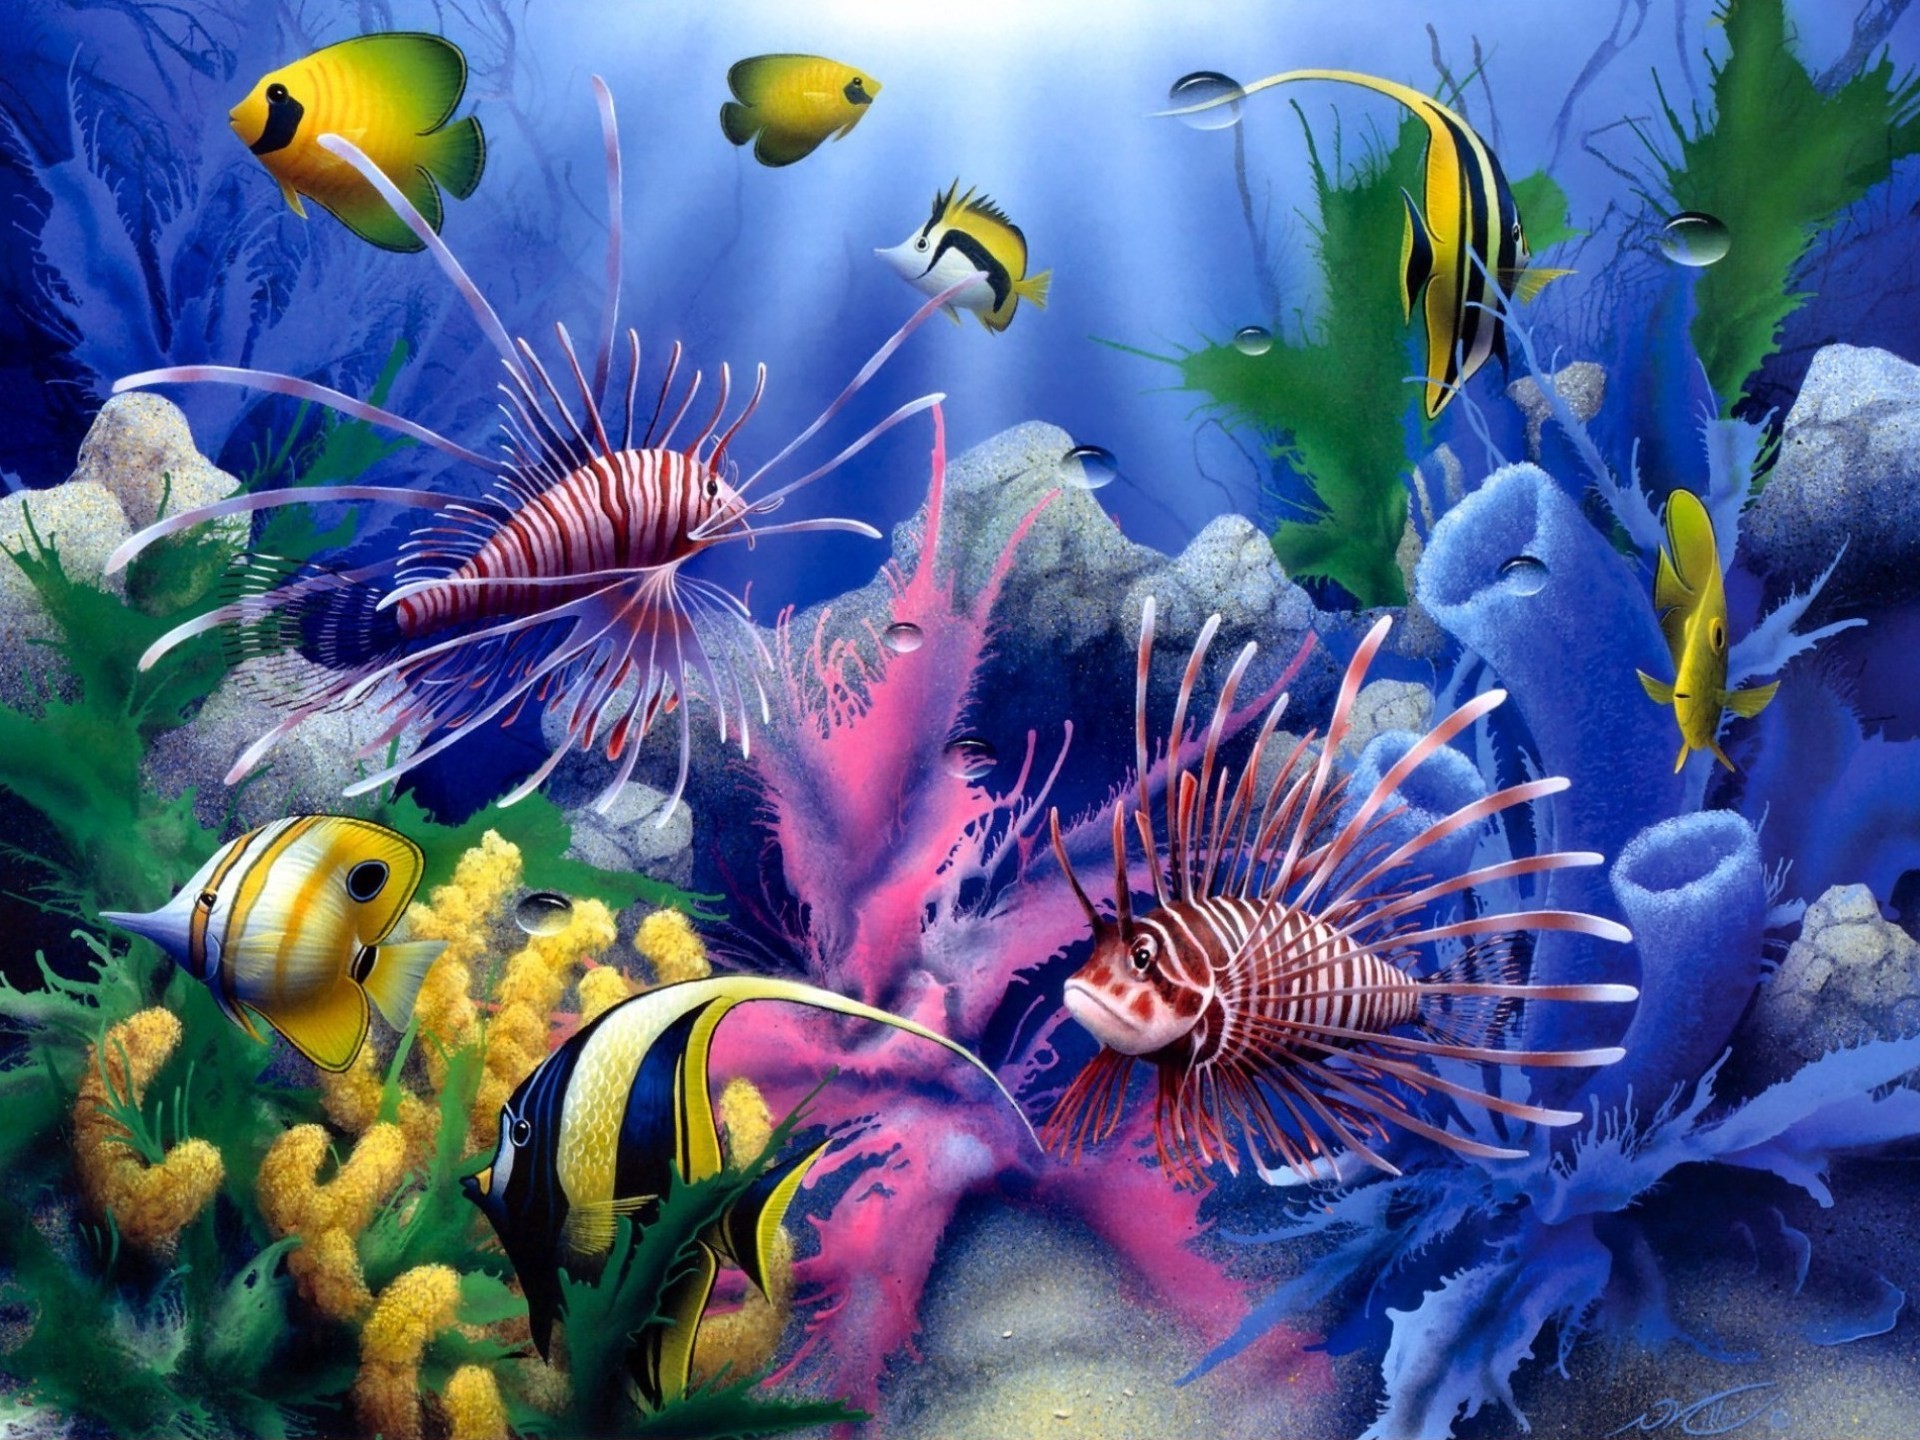 1920x1440 Lions of the Sea David Miller painting art animals fishes tropical sealife  life color underwater coral reef ocean sea sunlight wallpaper background